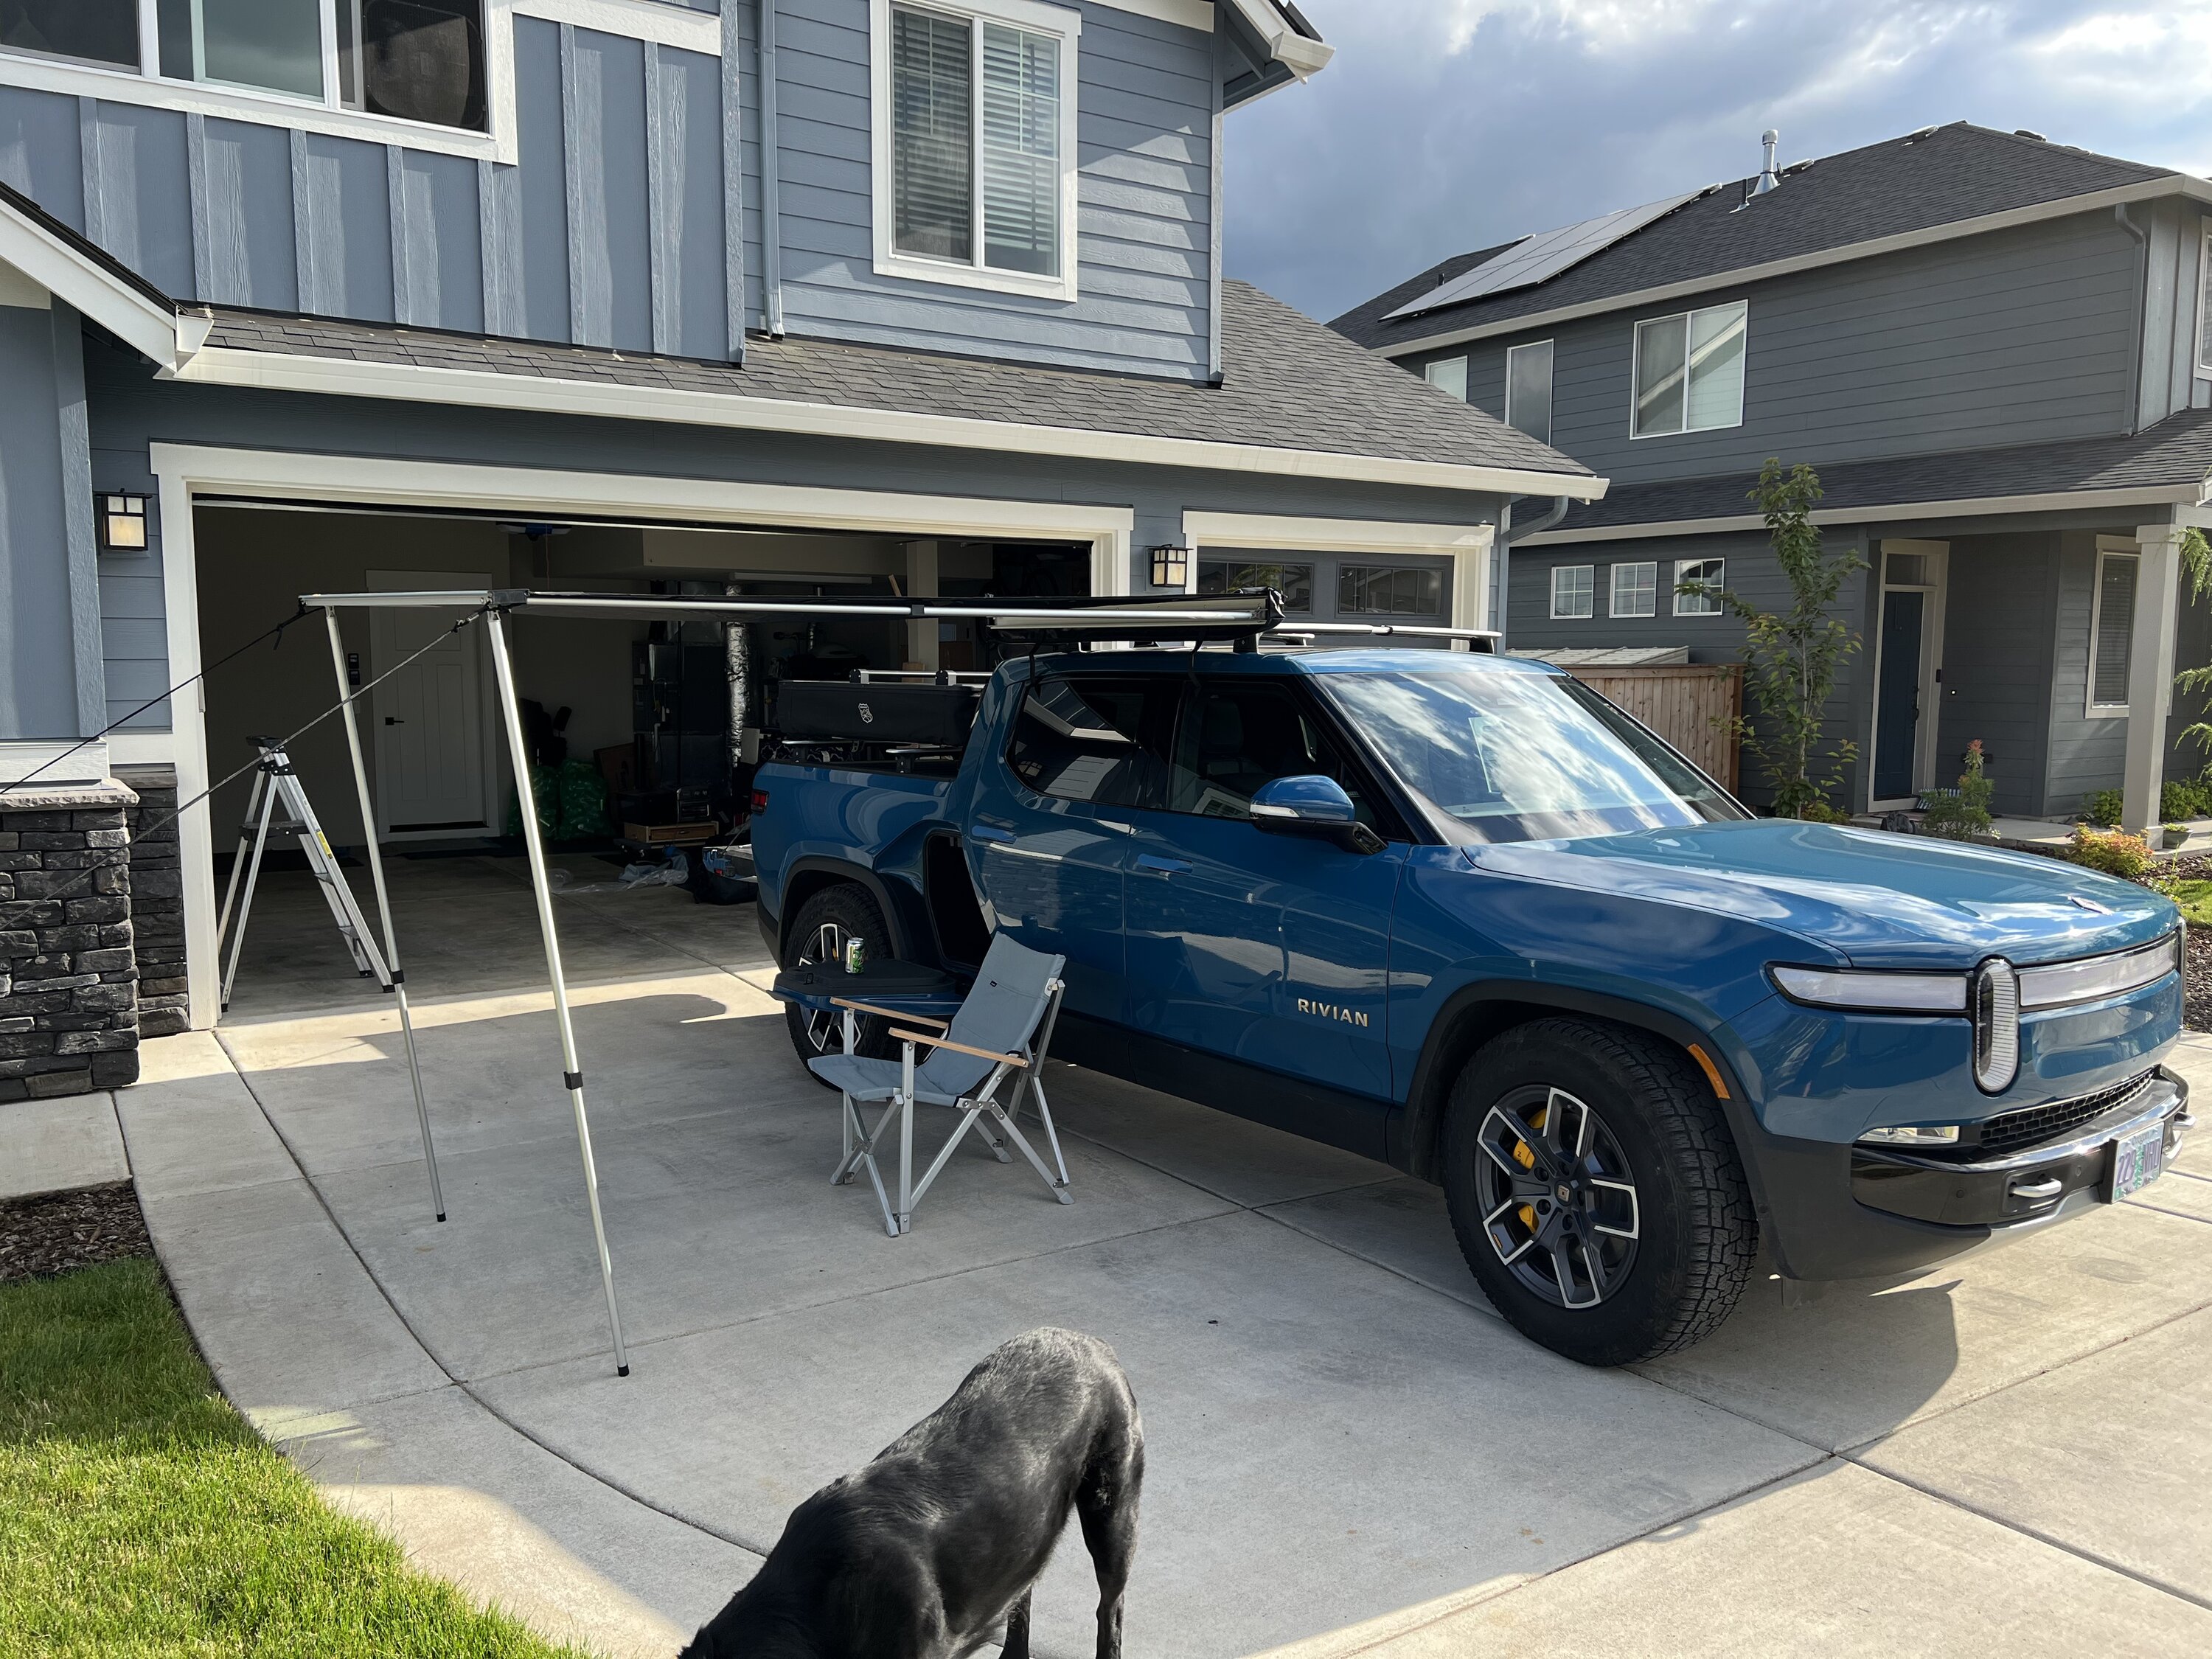 Rivian R1T R1S Roam Adventure Co 5’ Awning installed on R1T F8A46775-12E1-4324-BA1A-E18BC37383C3